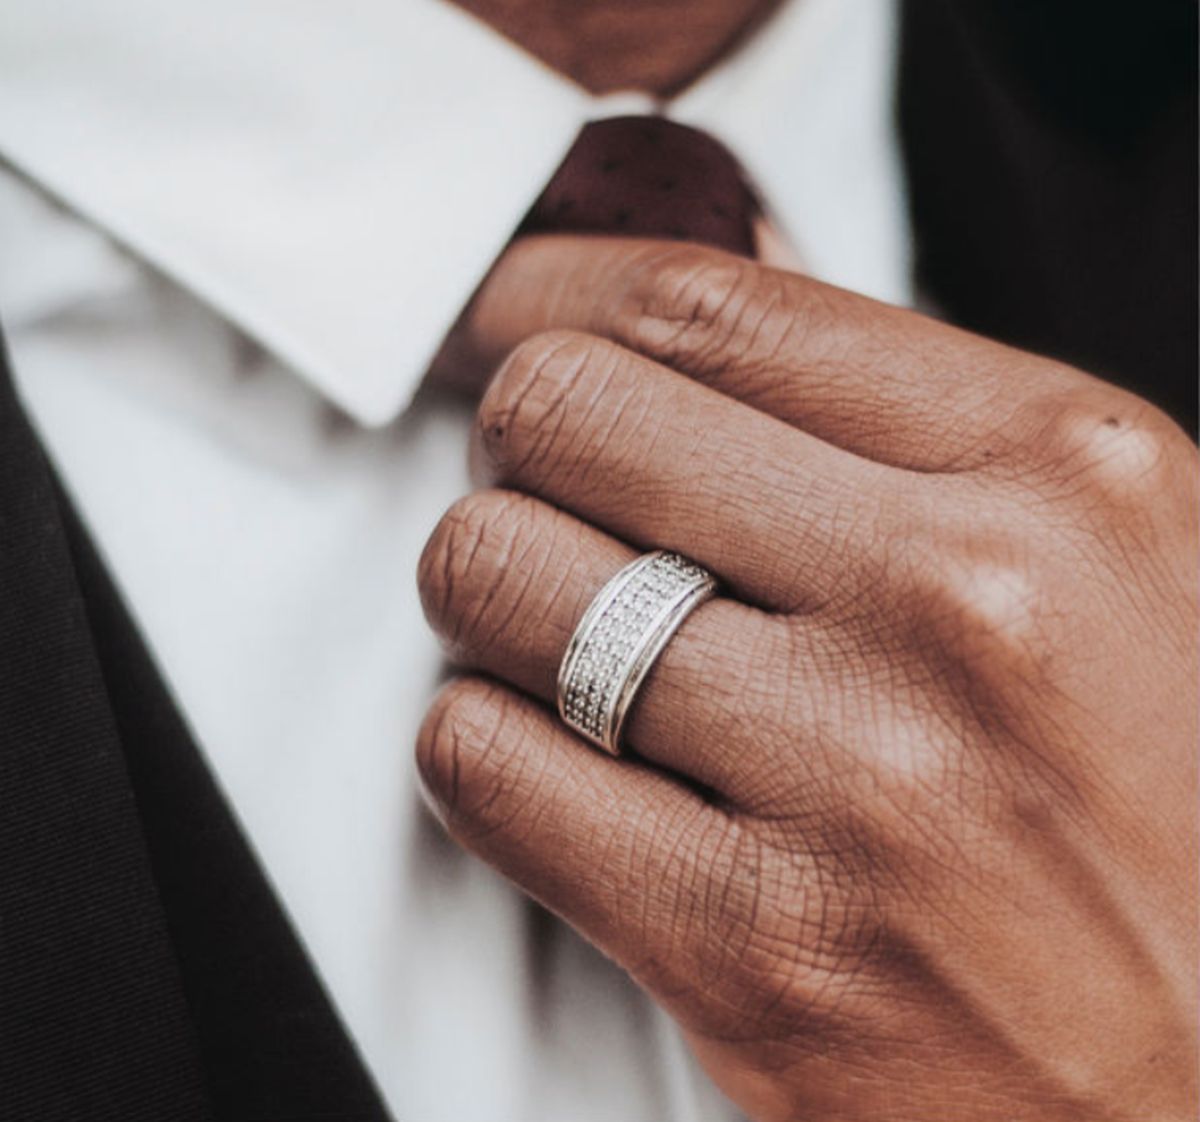 Who Buys The Man’s Wedding Ring 2 